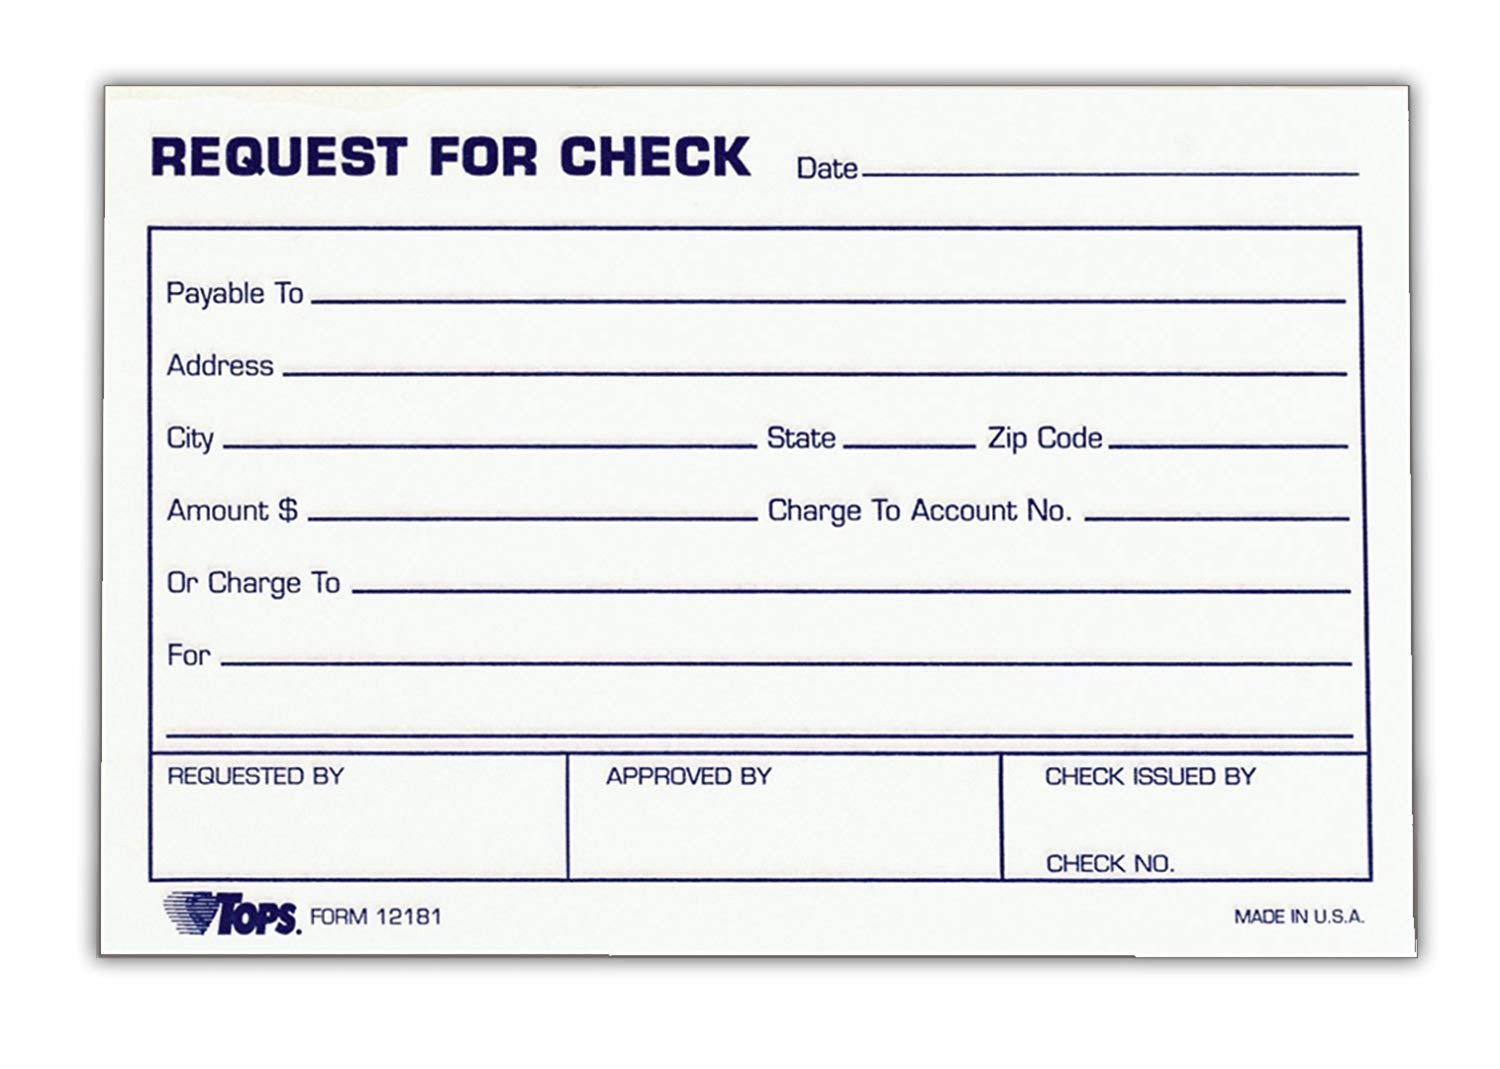 TOPS Check Request Forms 4 x 6 Inch 100 Sheets 2 Pack